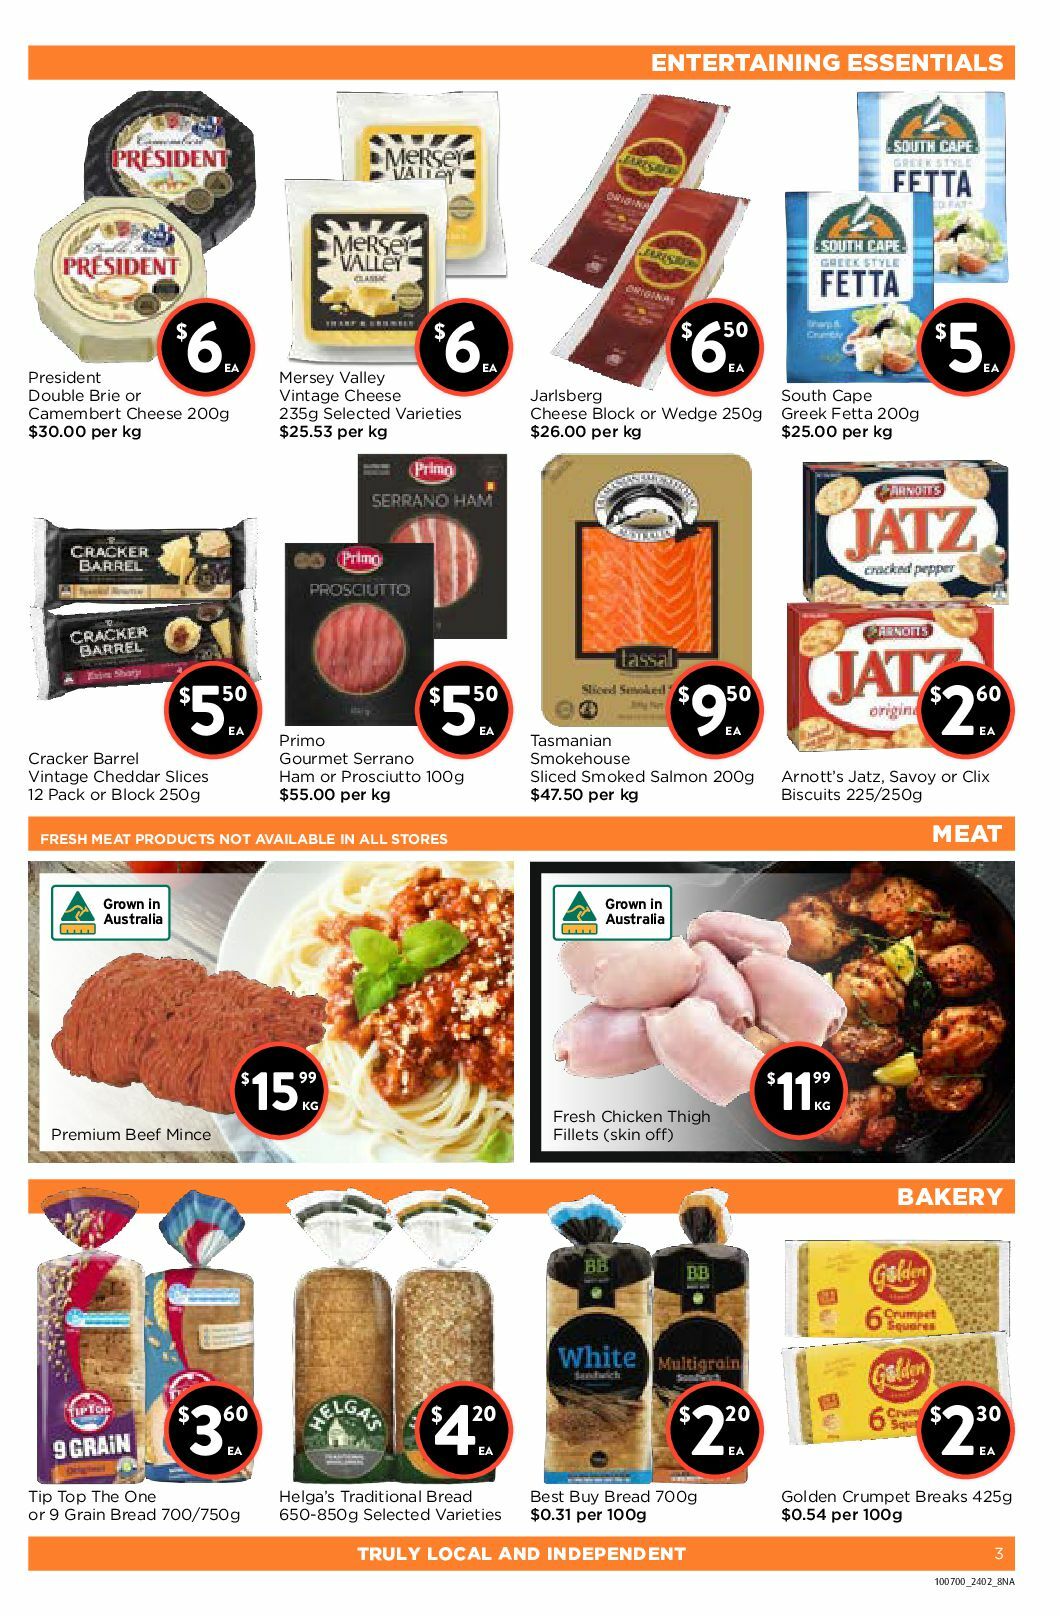 FoodWorks Catalogues from 24 February